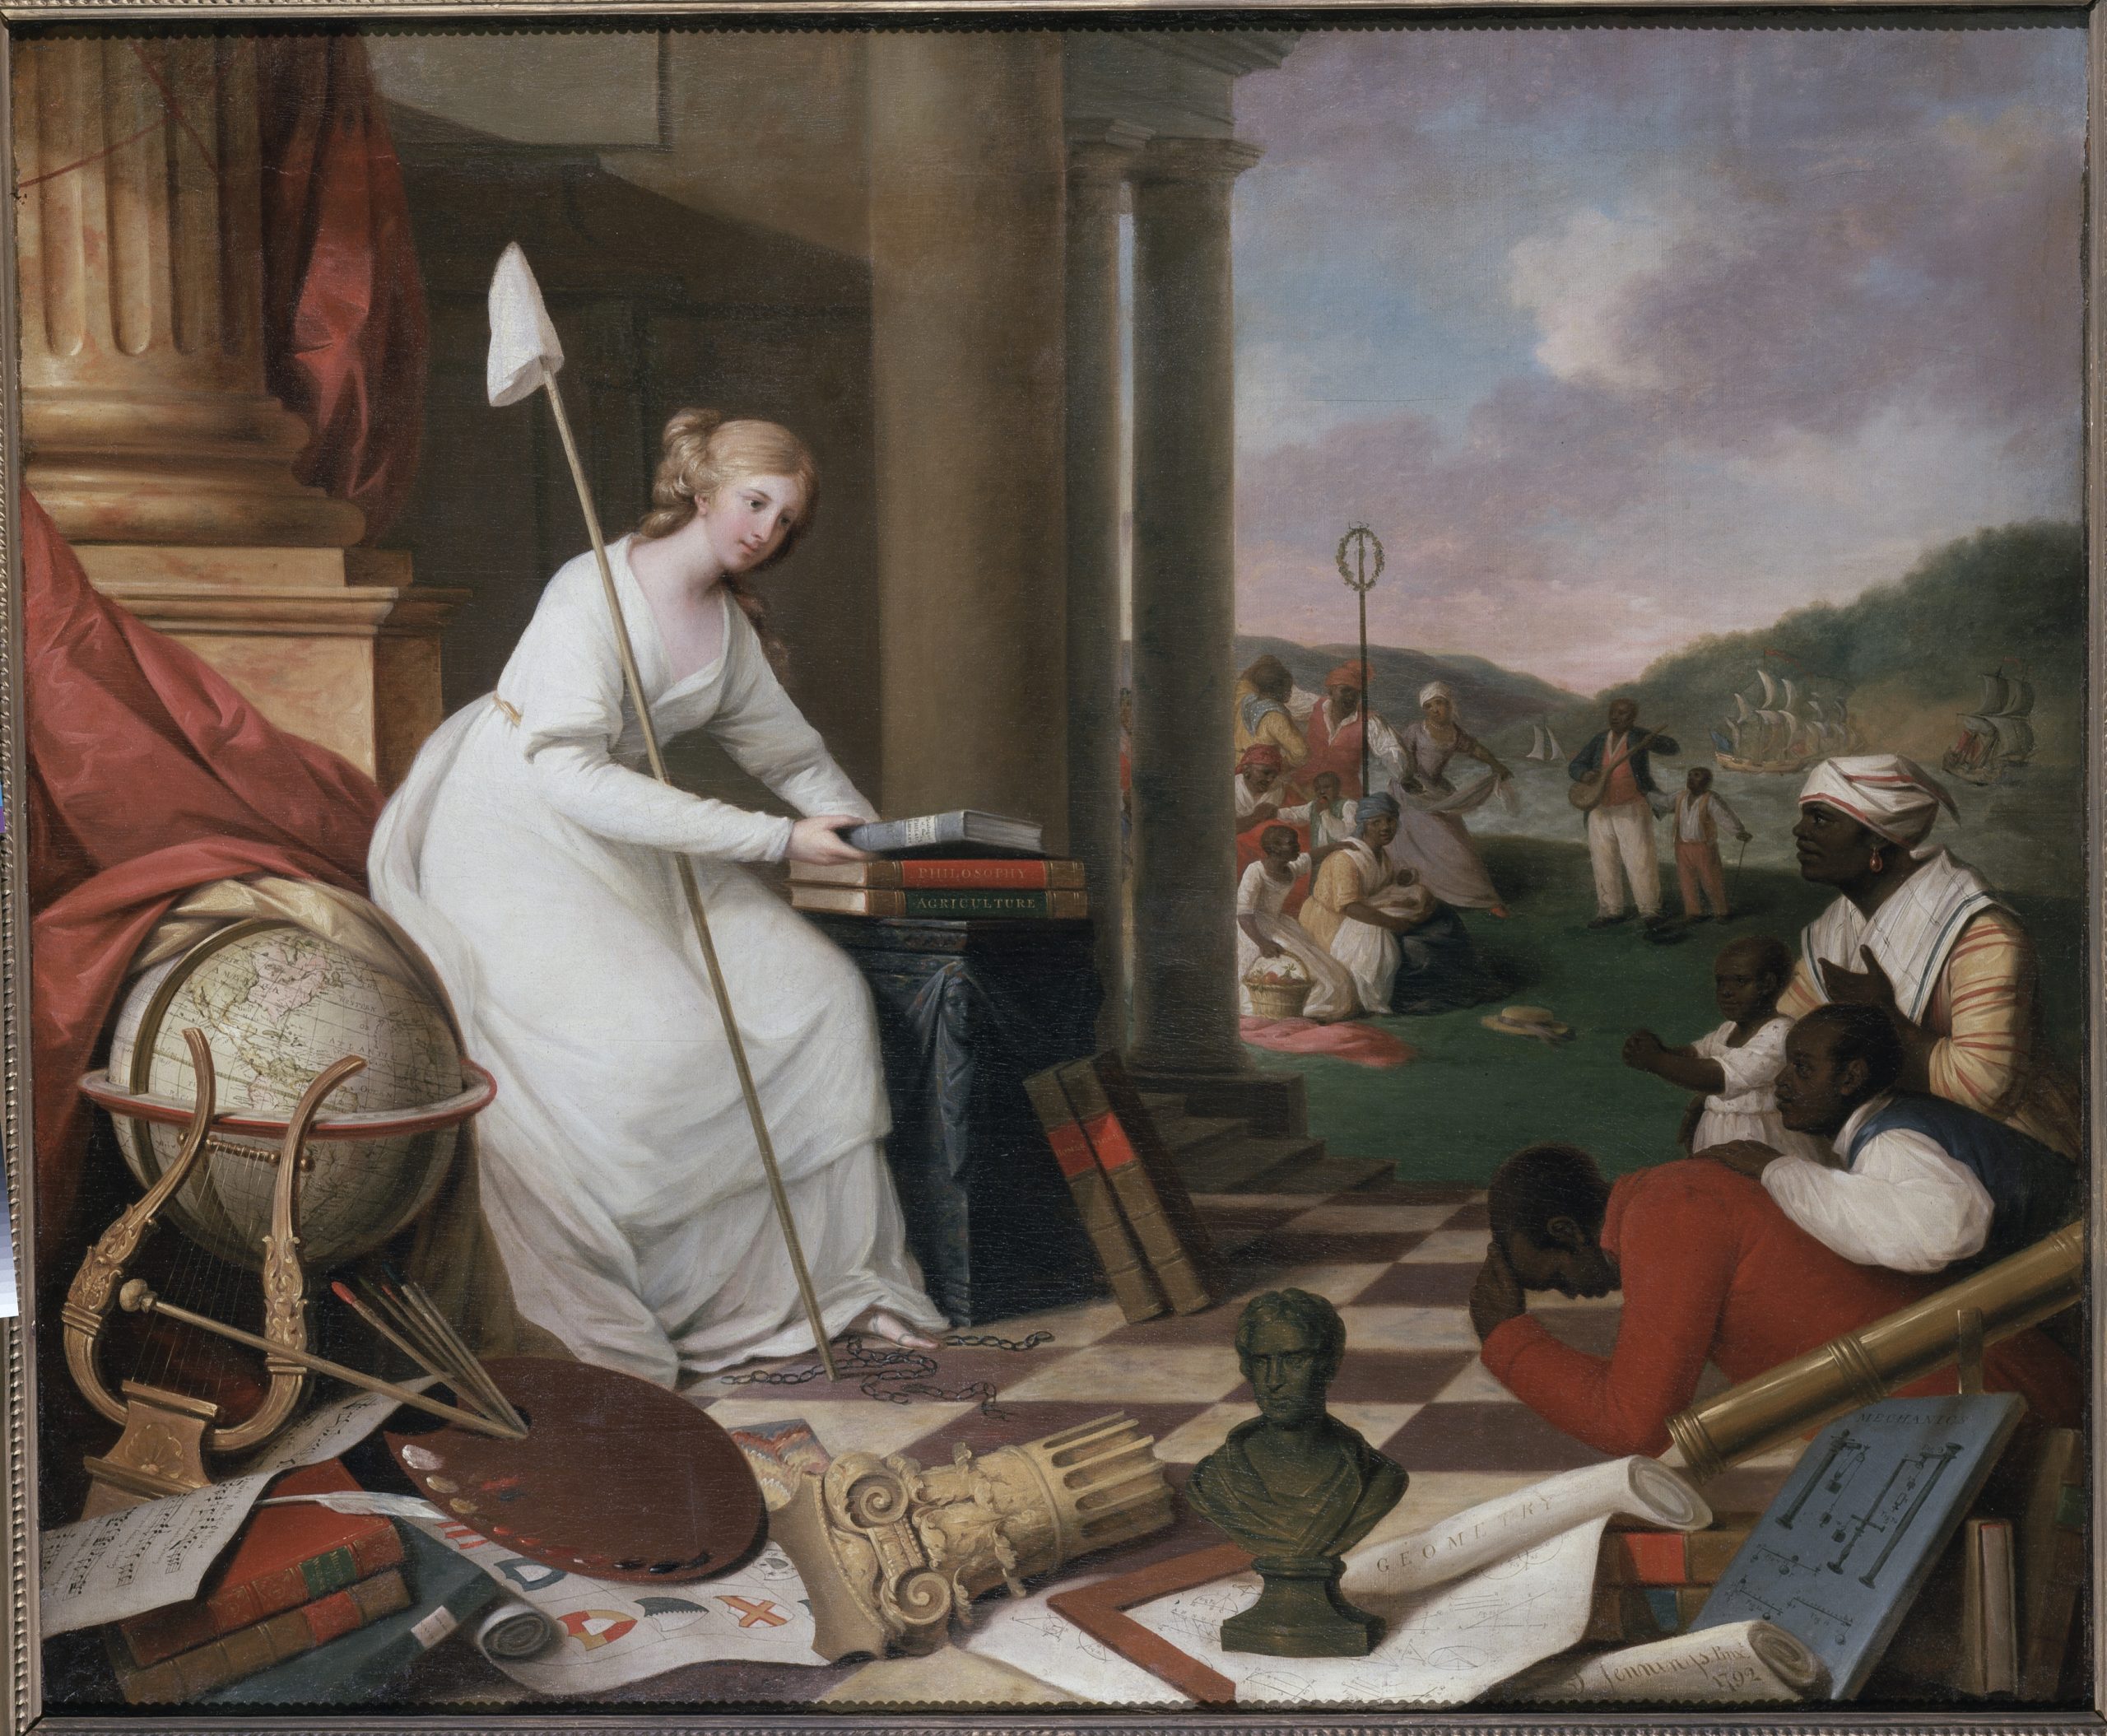 This painting, Liberty Presenting the Arts and Sciences, is the subject of this less, Imagining the Abolition of Slavery.